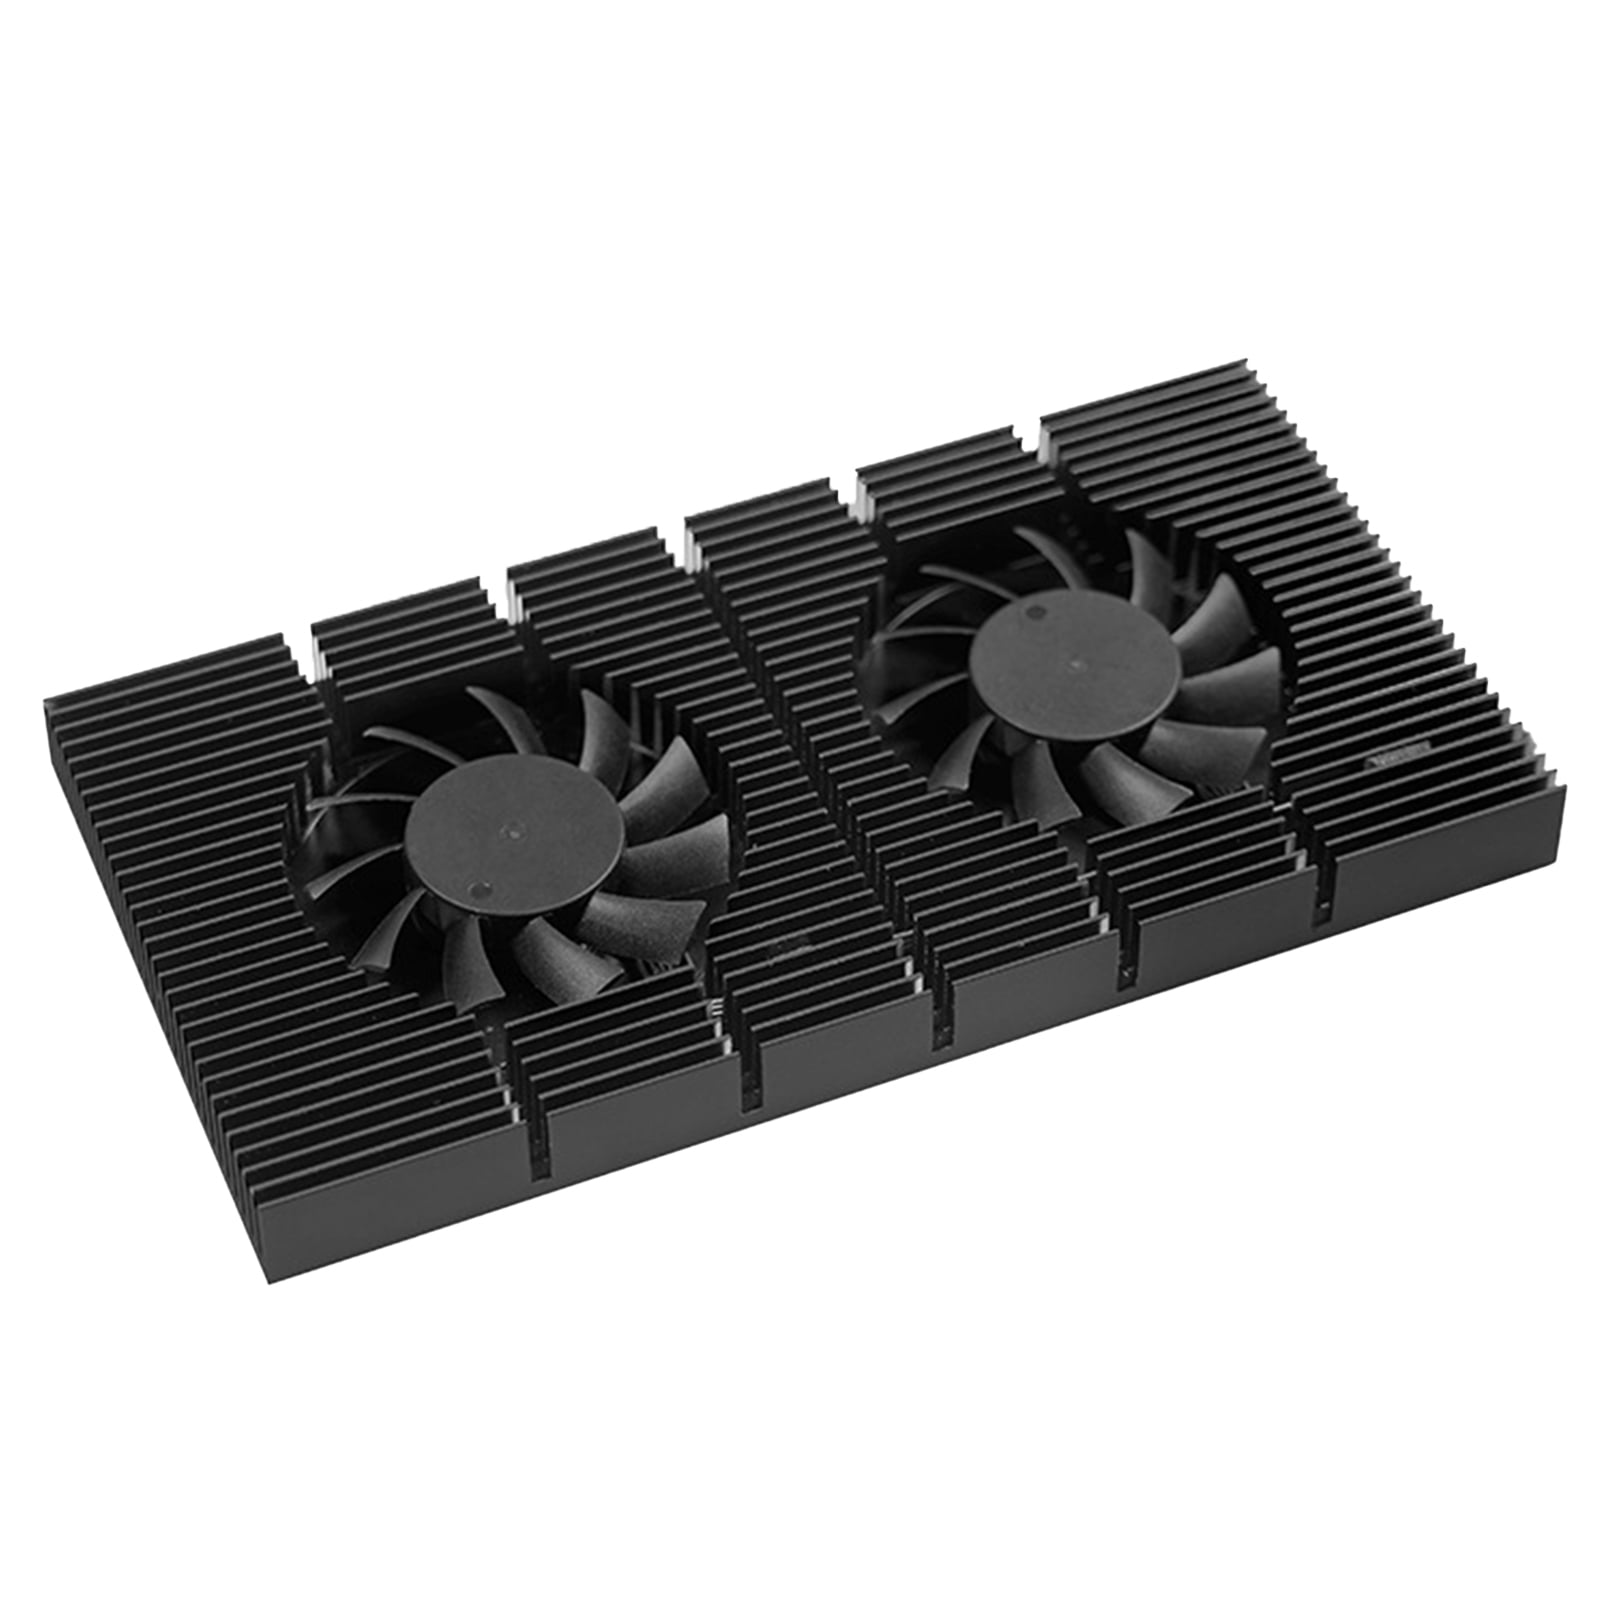 Card Cooling Fan Low Noise Universal High Speed Graphics Card Cooler for RTX 3090/3080/3070 - Walmart.com